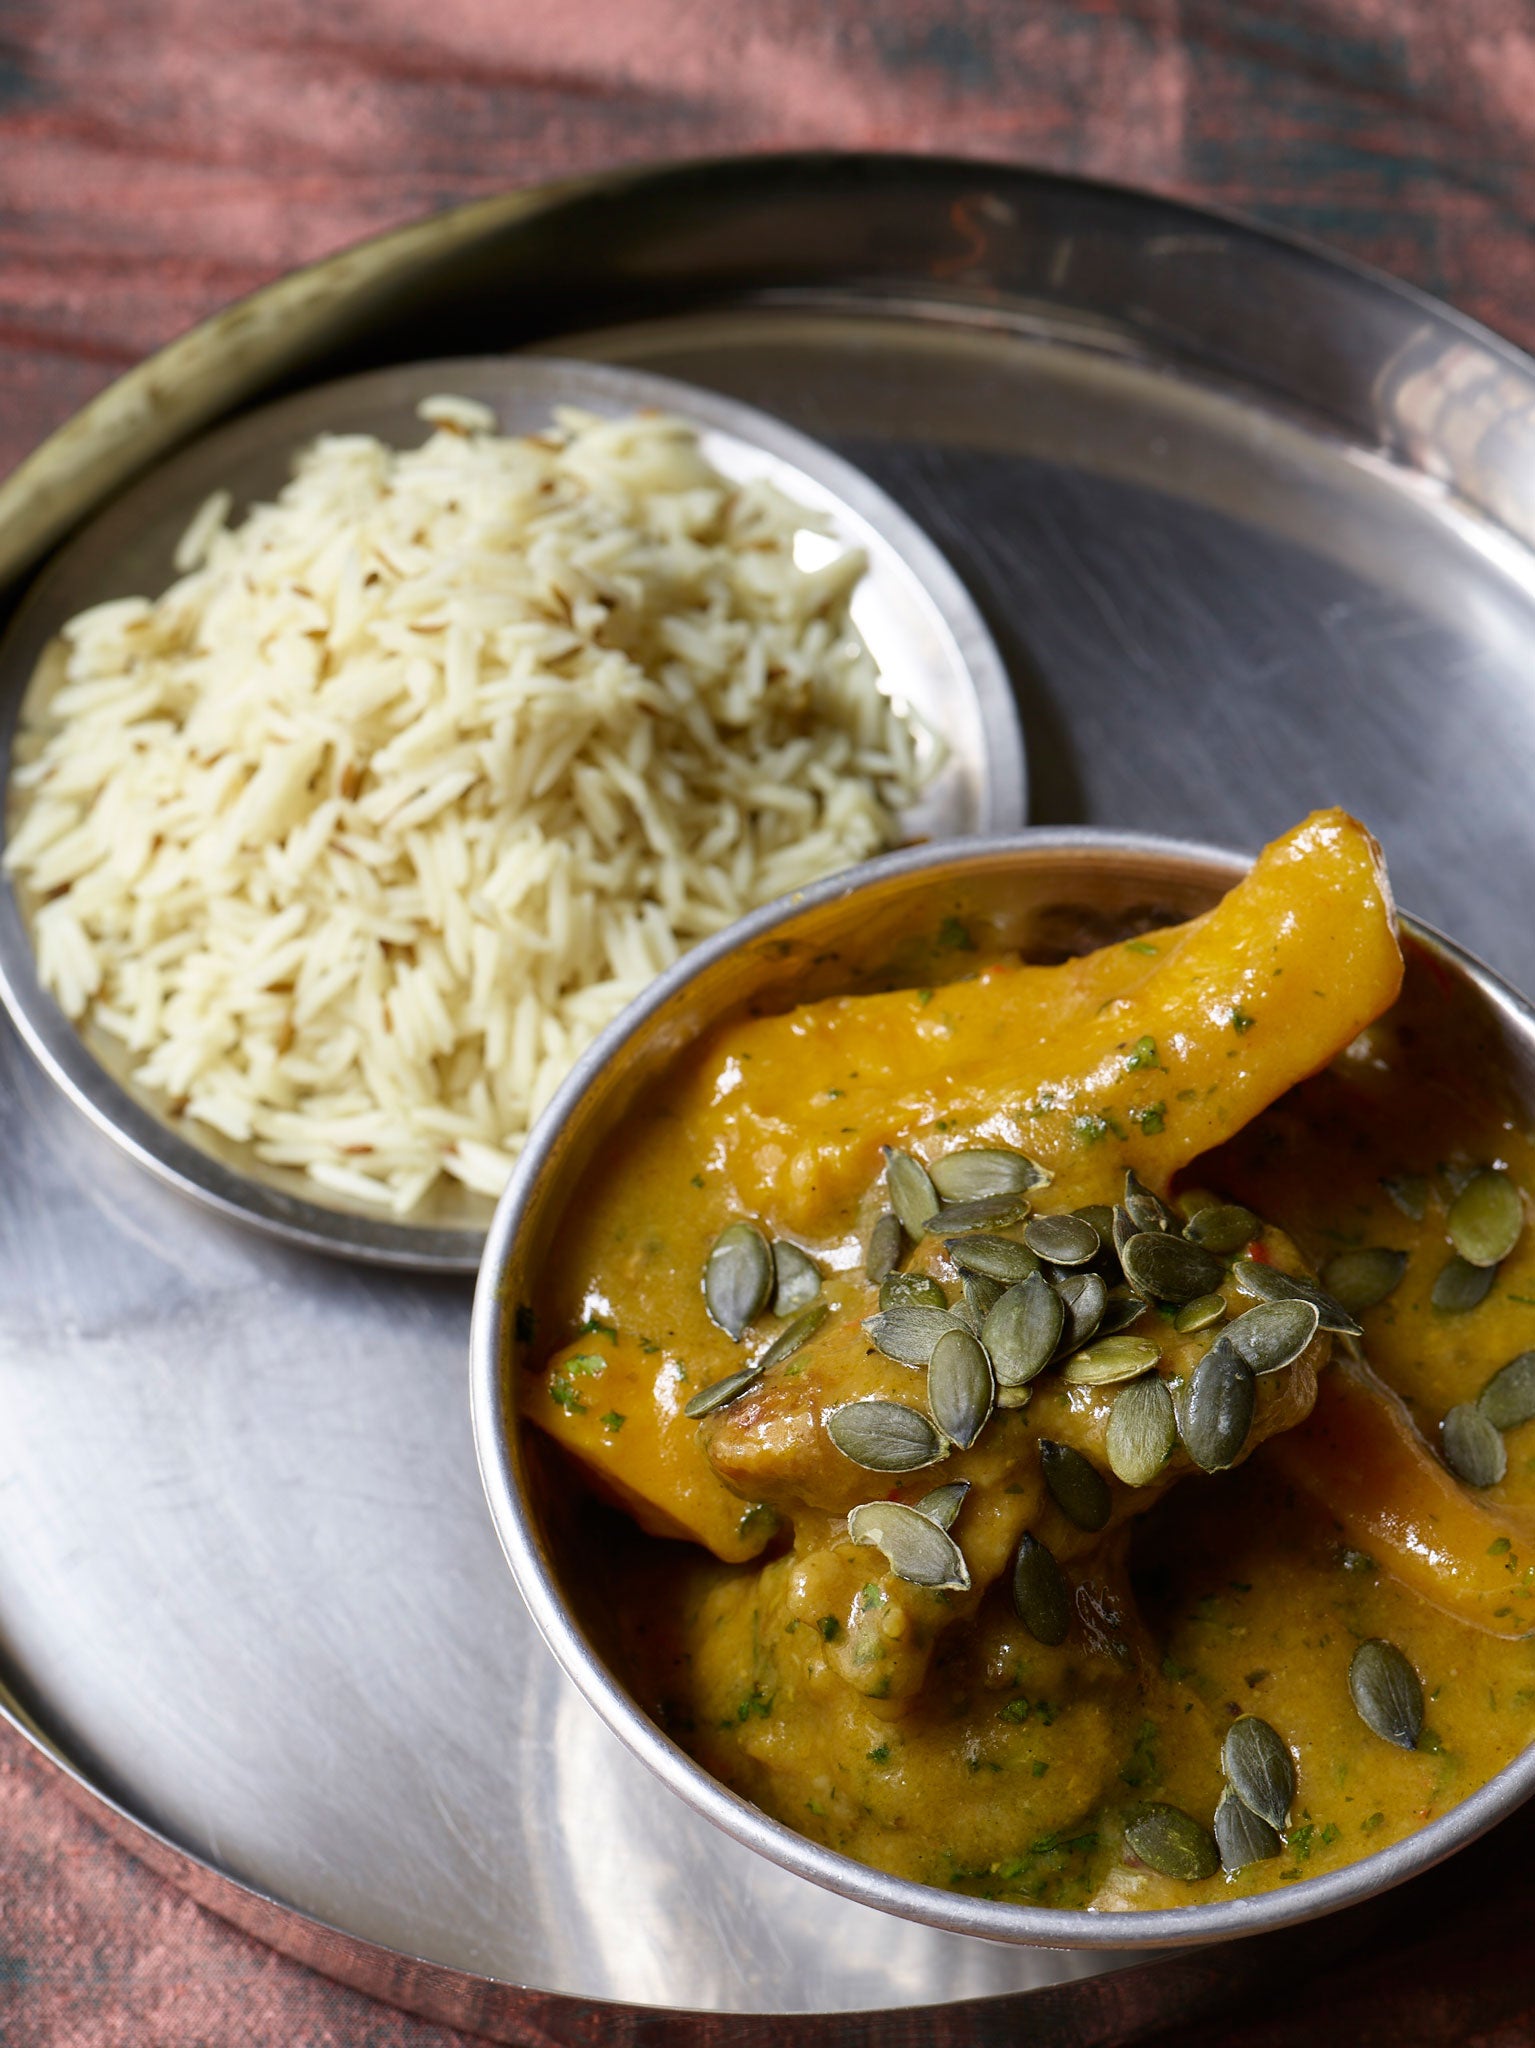 Mark's pheasant and squash curry